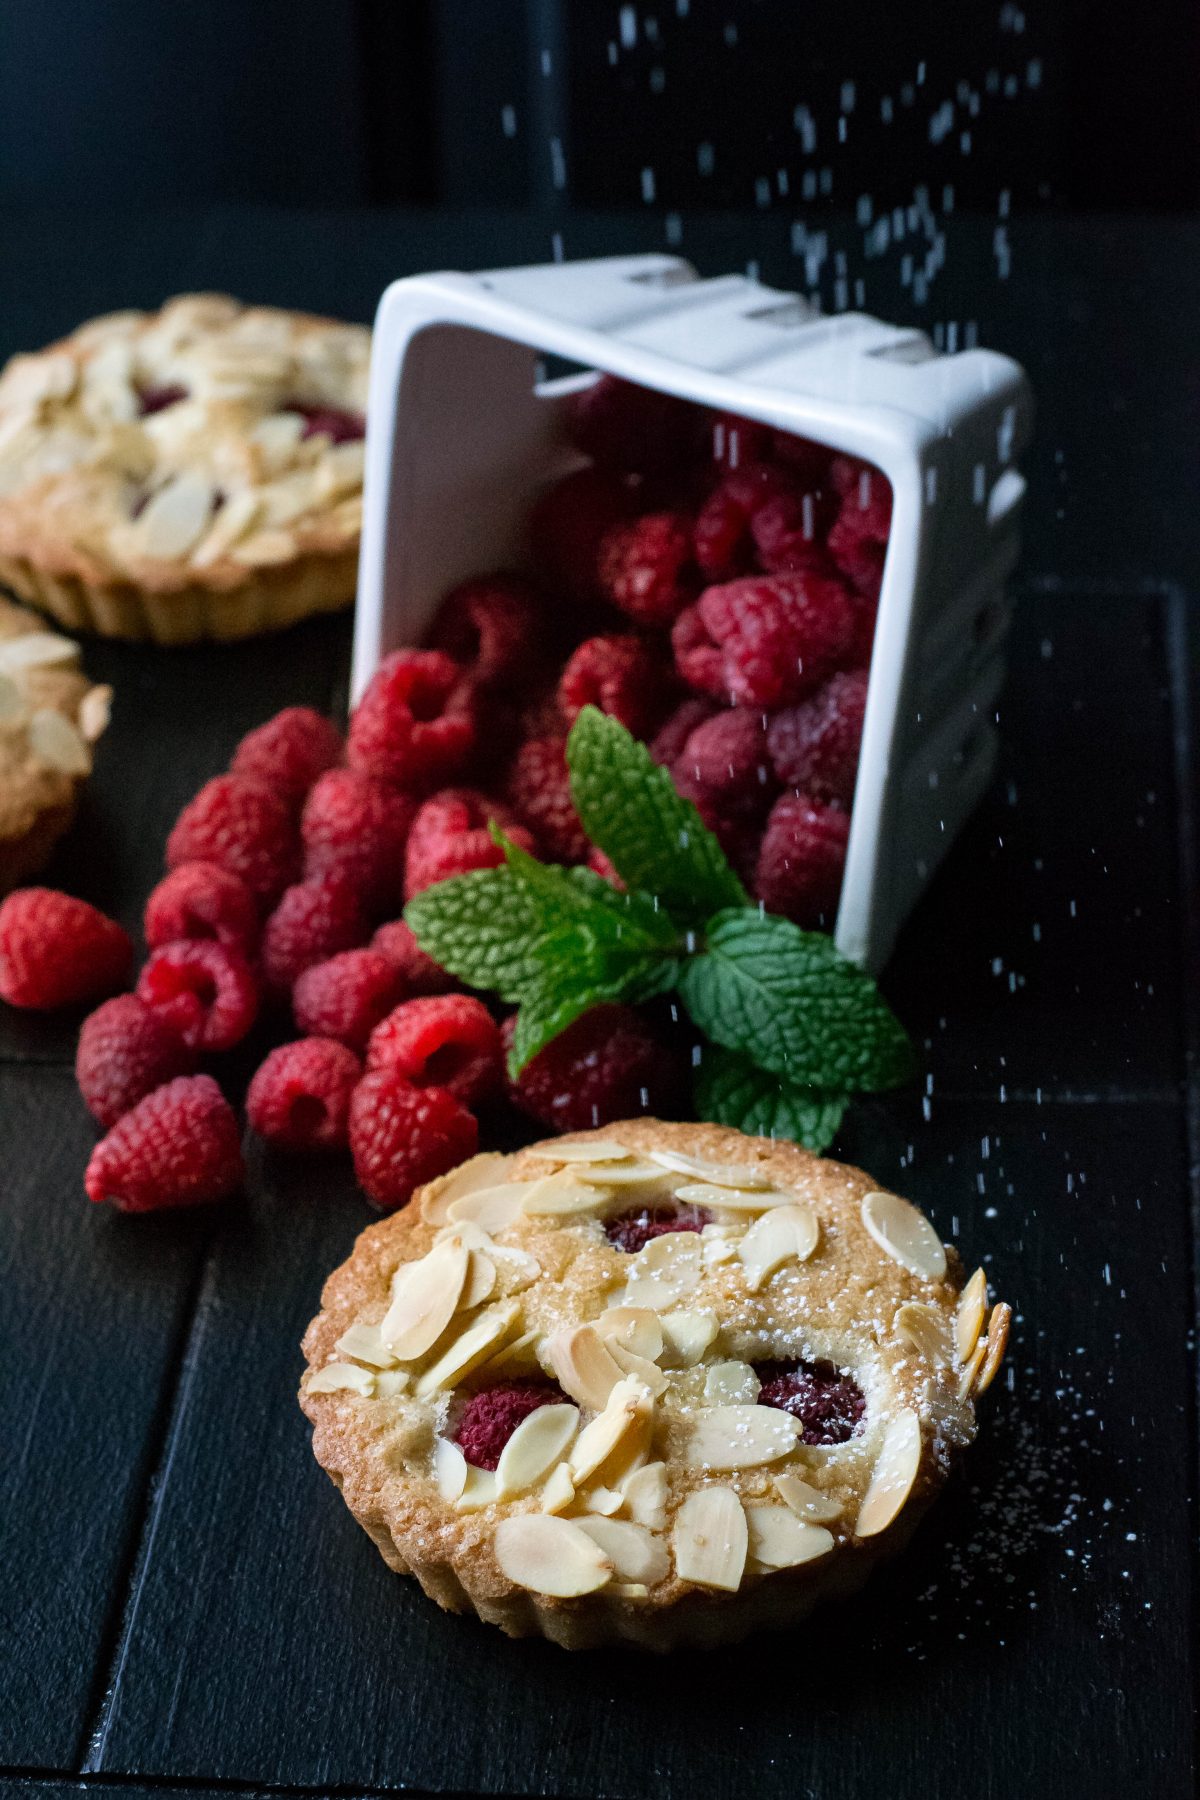 Raspberry Almond Mini Cakes - What the Forks for Dinner?